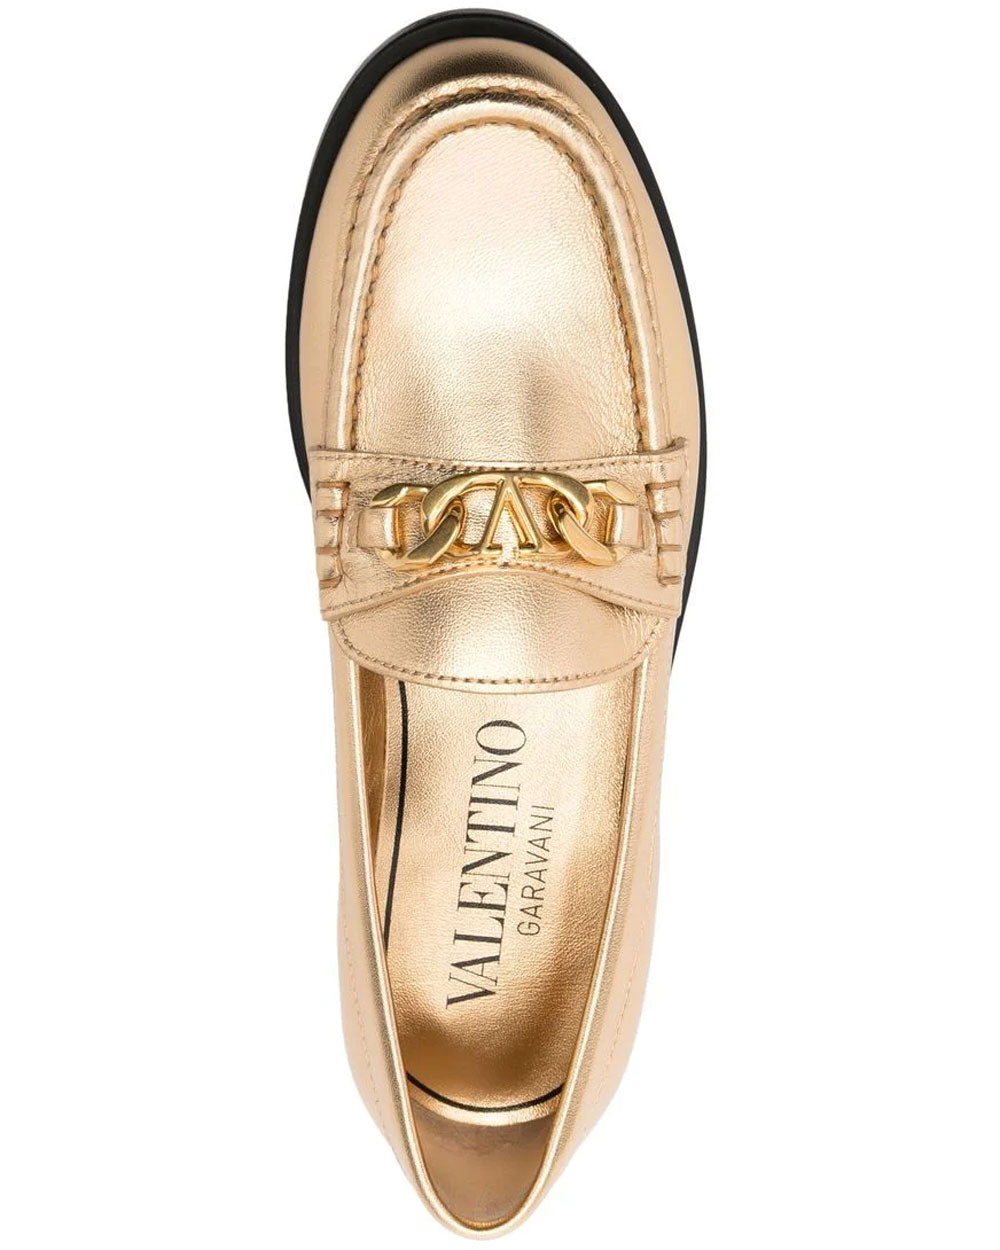 VLOGO Chain Leather Loafer in Antique Brass